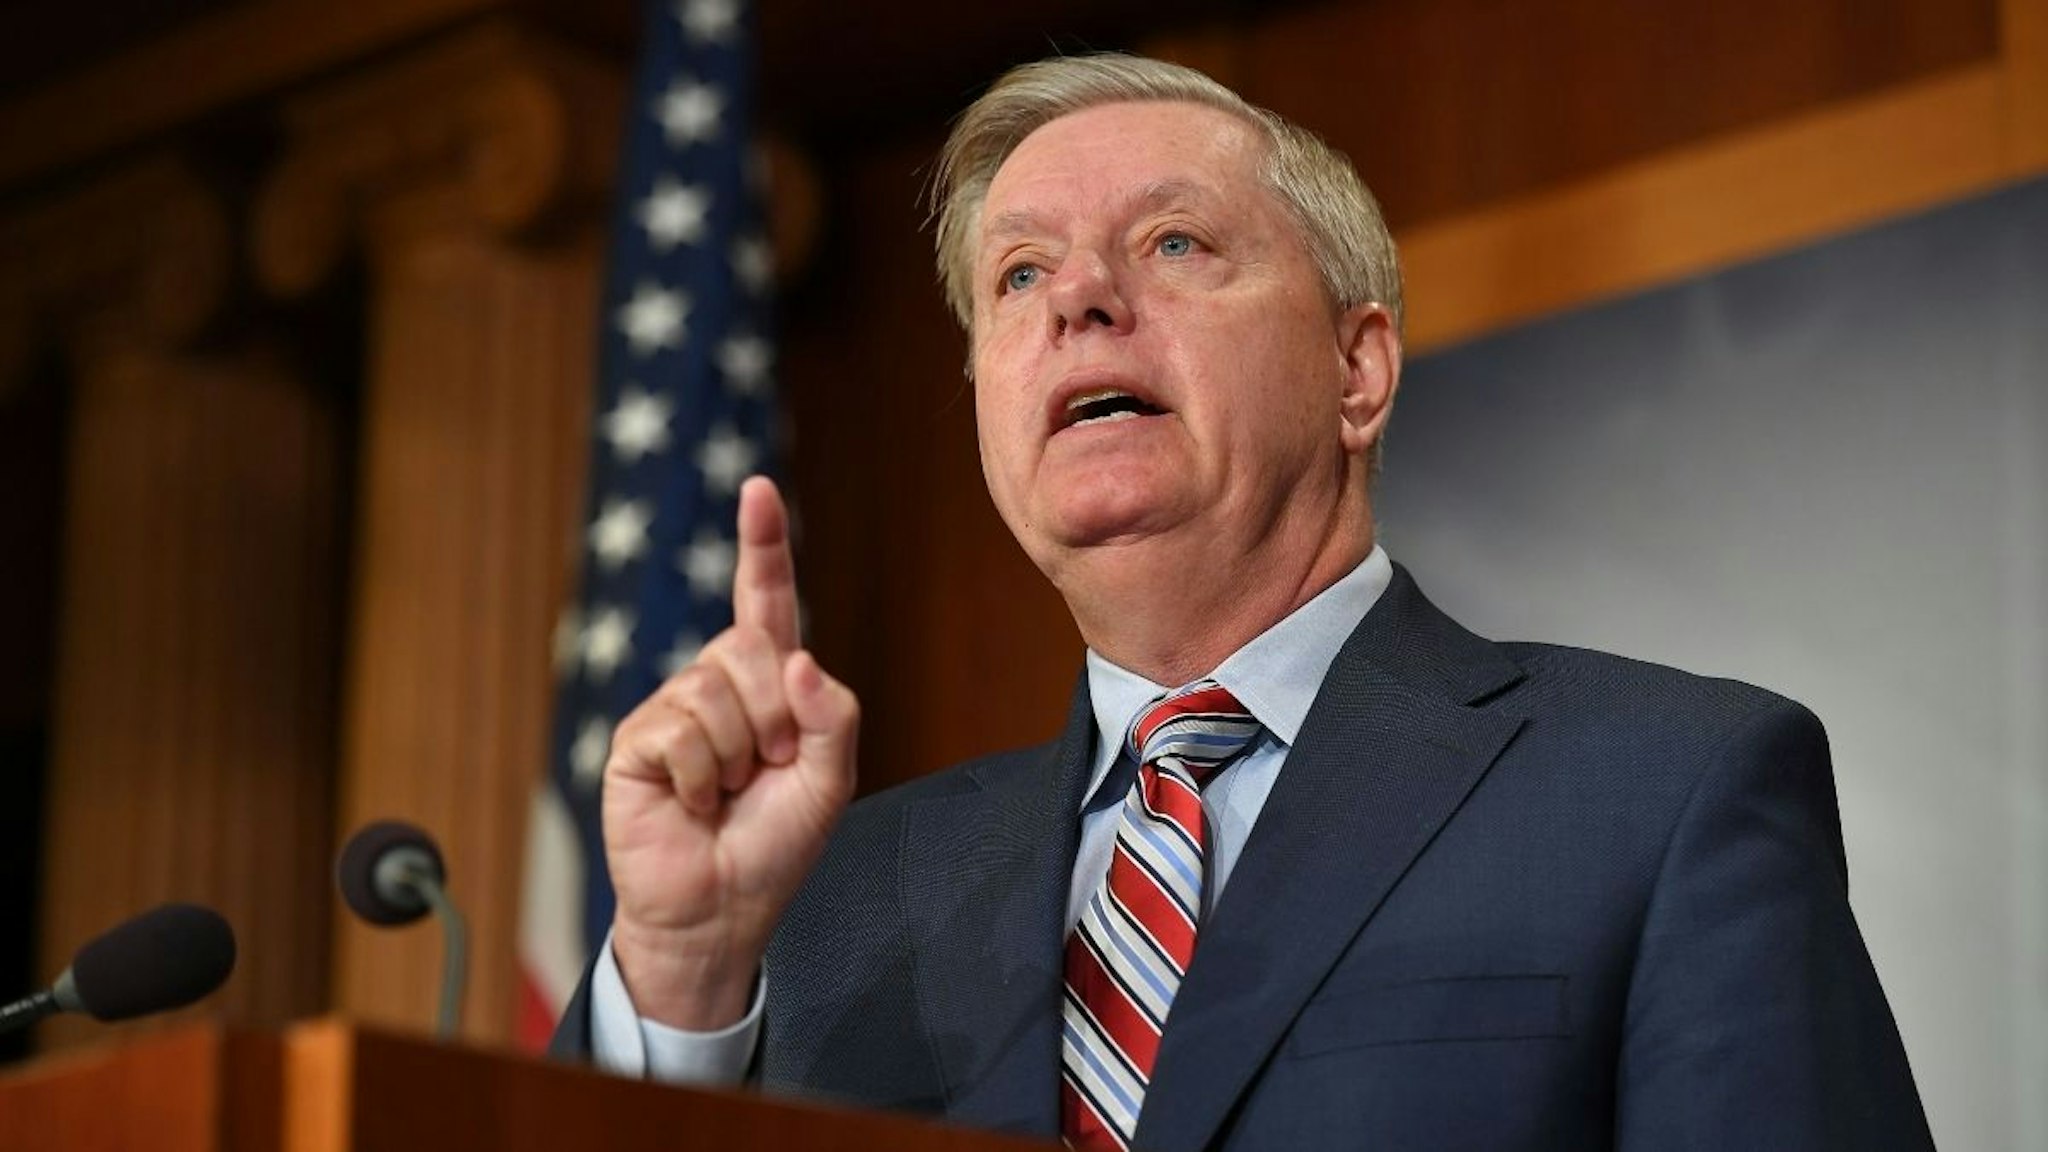 Senate Judiciary Committee Chairman Lindsey Graham, R-SC, speaks during a press conference on US Attorney General William Barr's summary of the Mueller report at the US Capitol in Washington, DC on March 25, 2019.